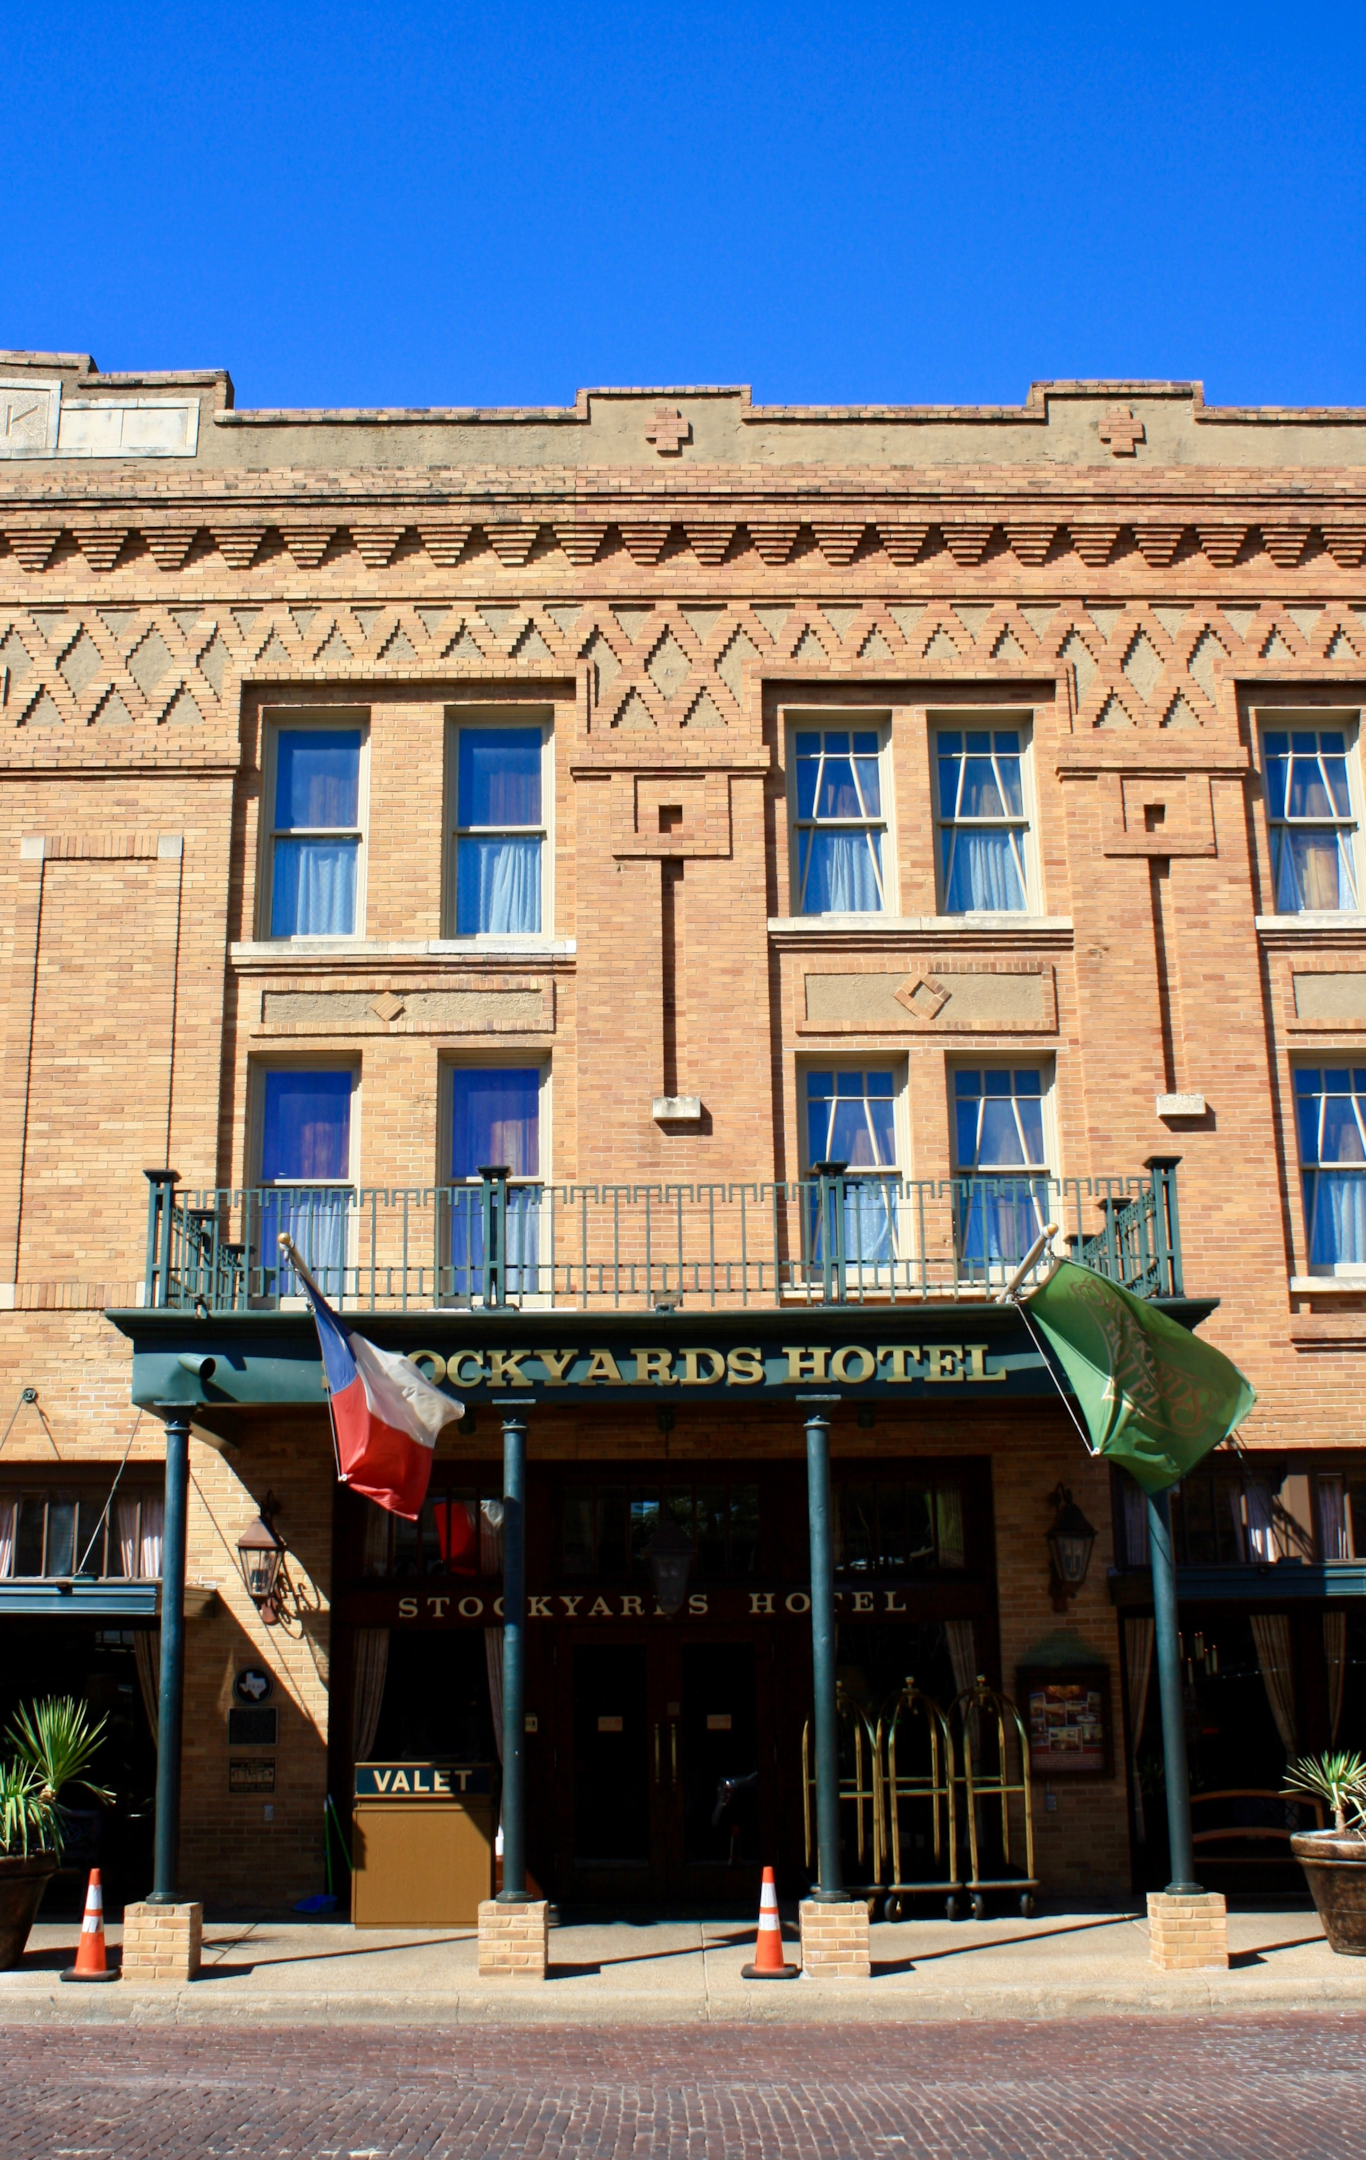 Part of Fort Worth's brand positioning is its Western heritage, including The Stockyards